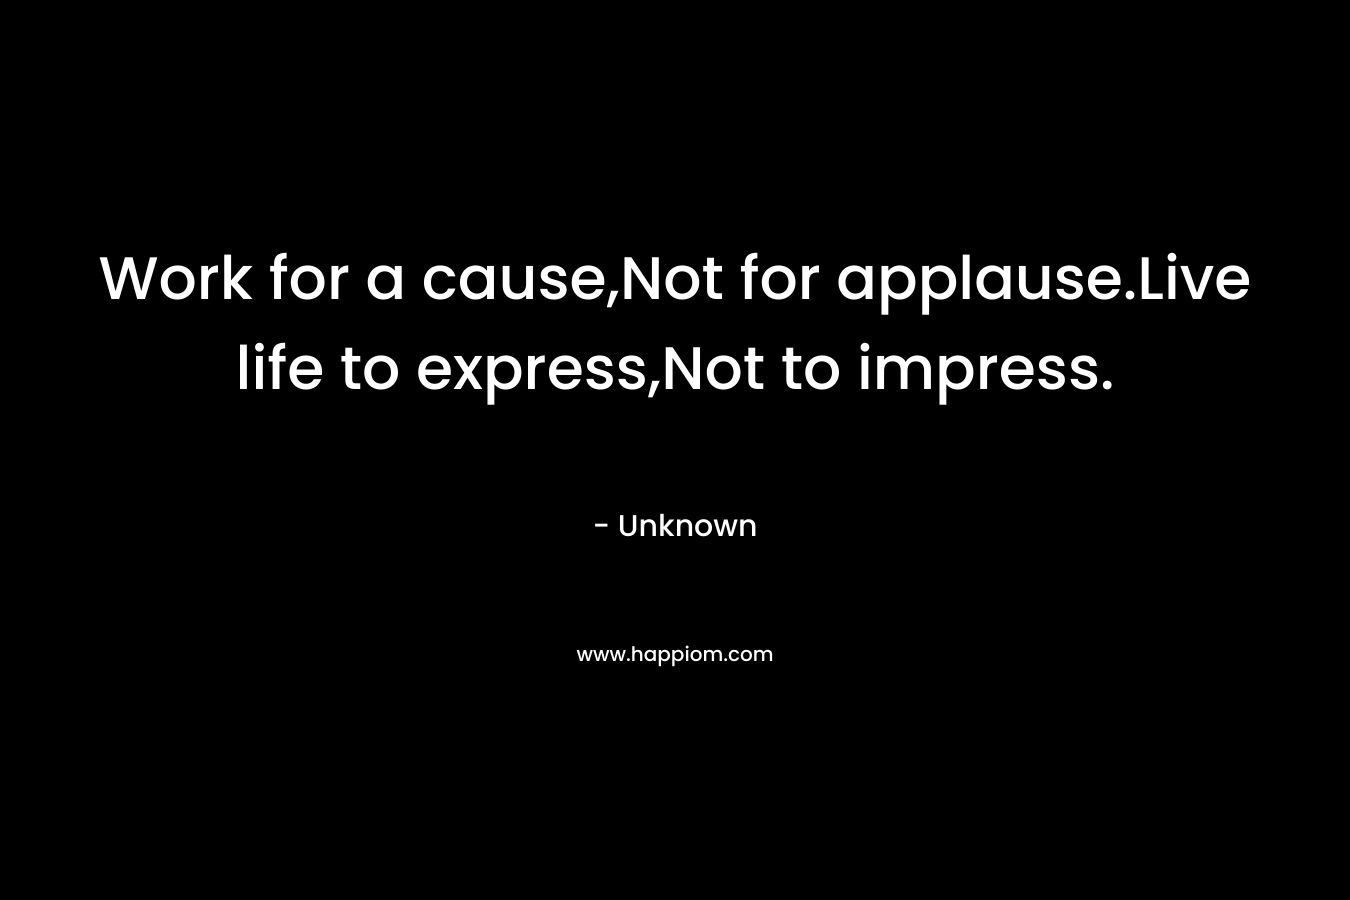 Work for a cause,Not for applause.Live life to express,Not to impress.